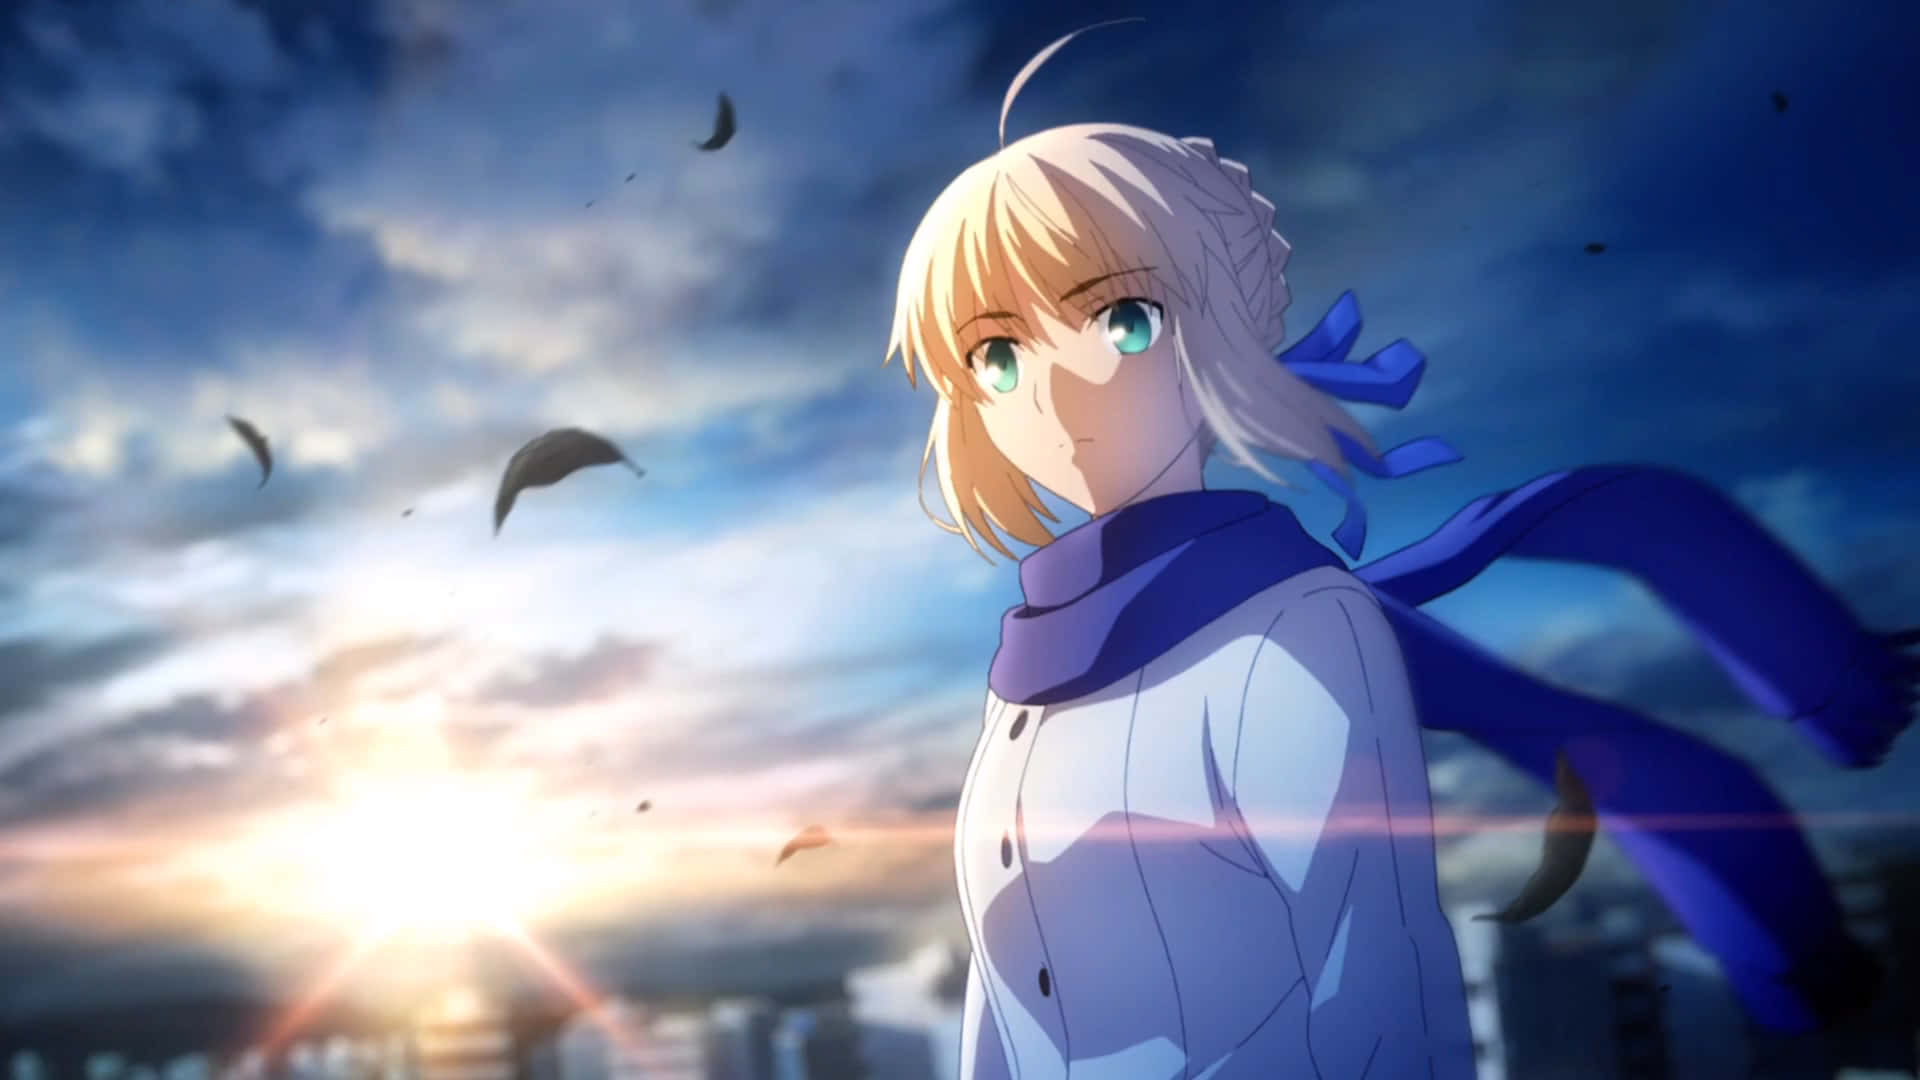 Sabers Fate Stay Night Med Blåt Scarf Anime Mural 3D Tapet Wallpaper